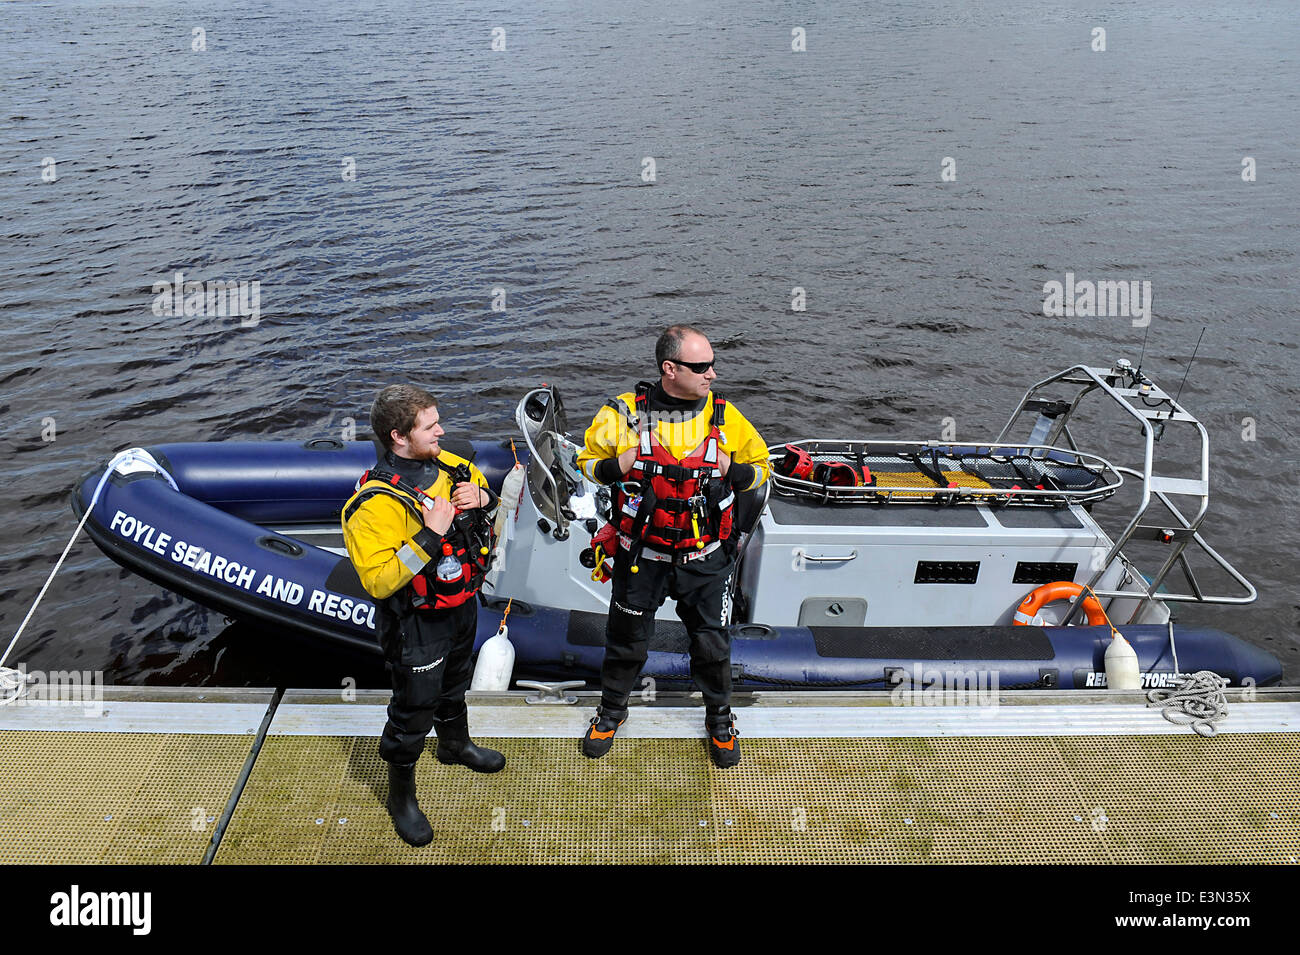 Crew members of the emergency Foyle Search And Rescue, wearing life jackets, on duty at the River Foyle, Derry, Londonderry Stock Photo